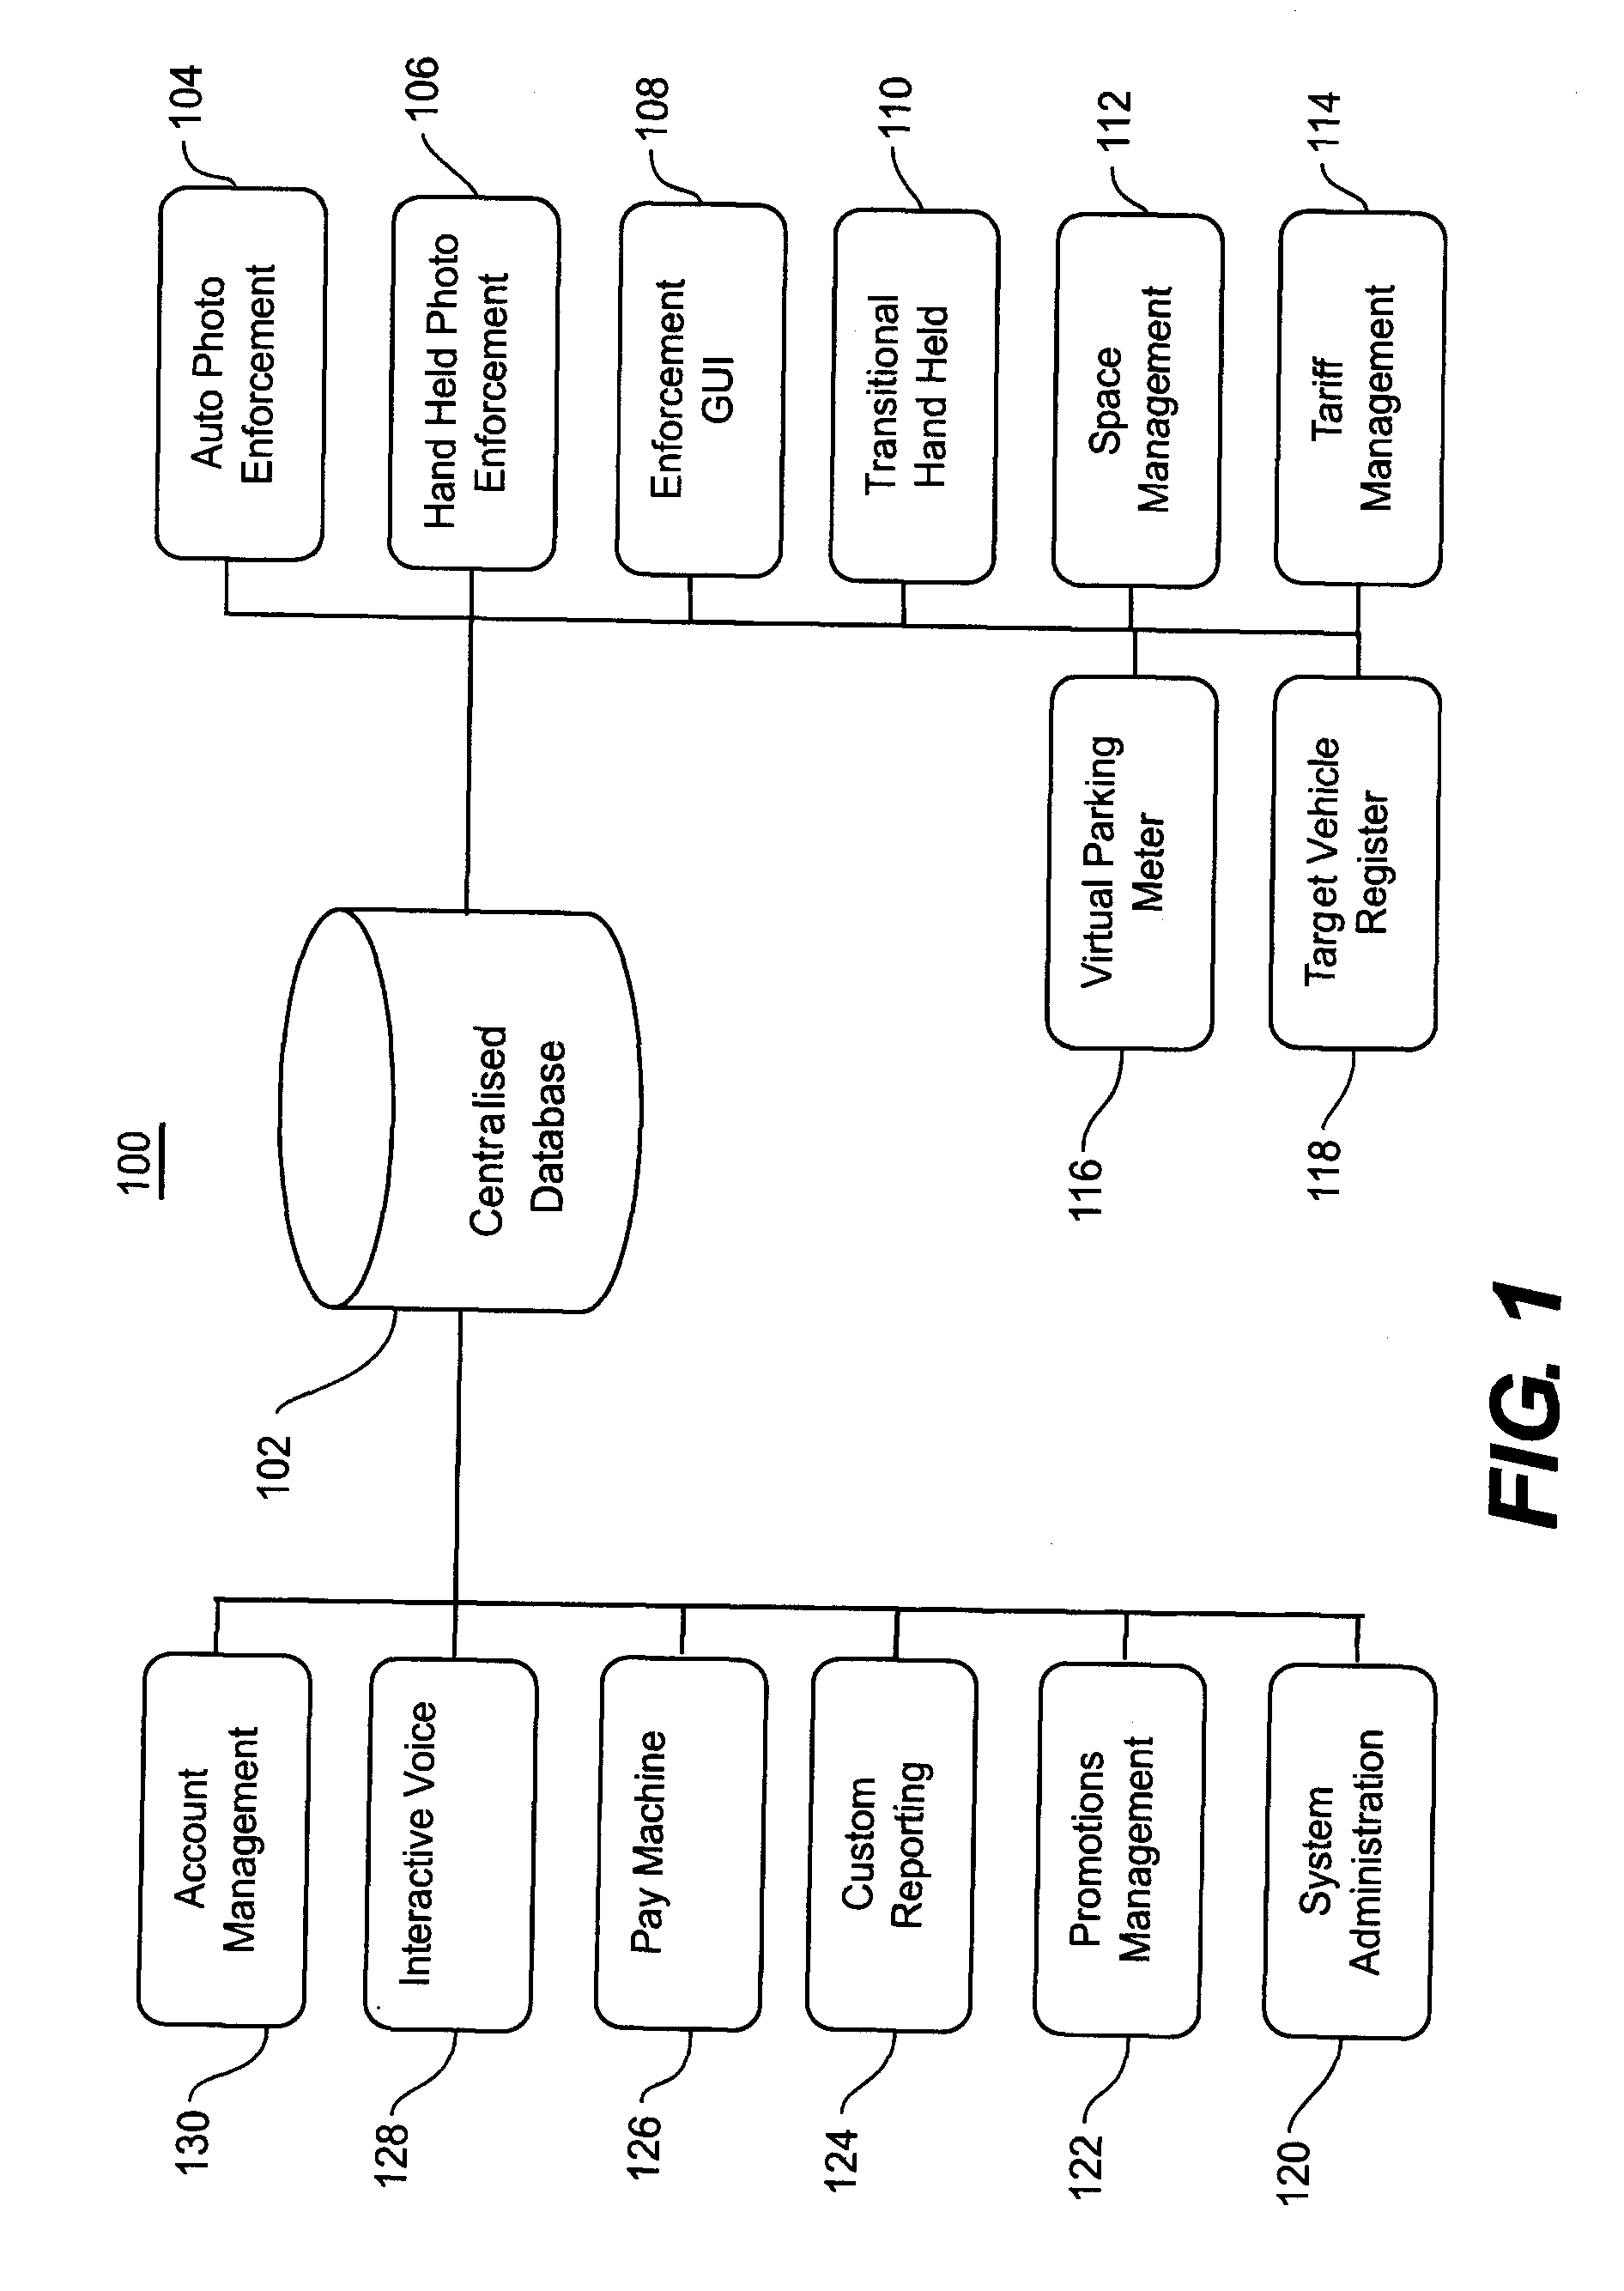 System and method for managing parking rights